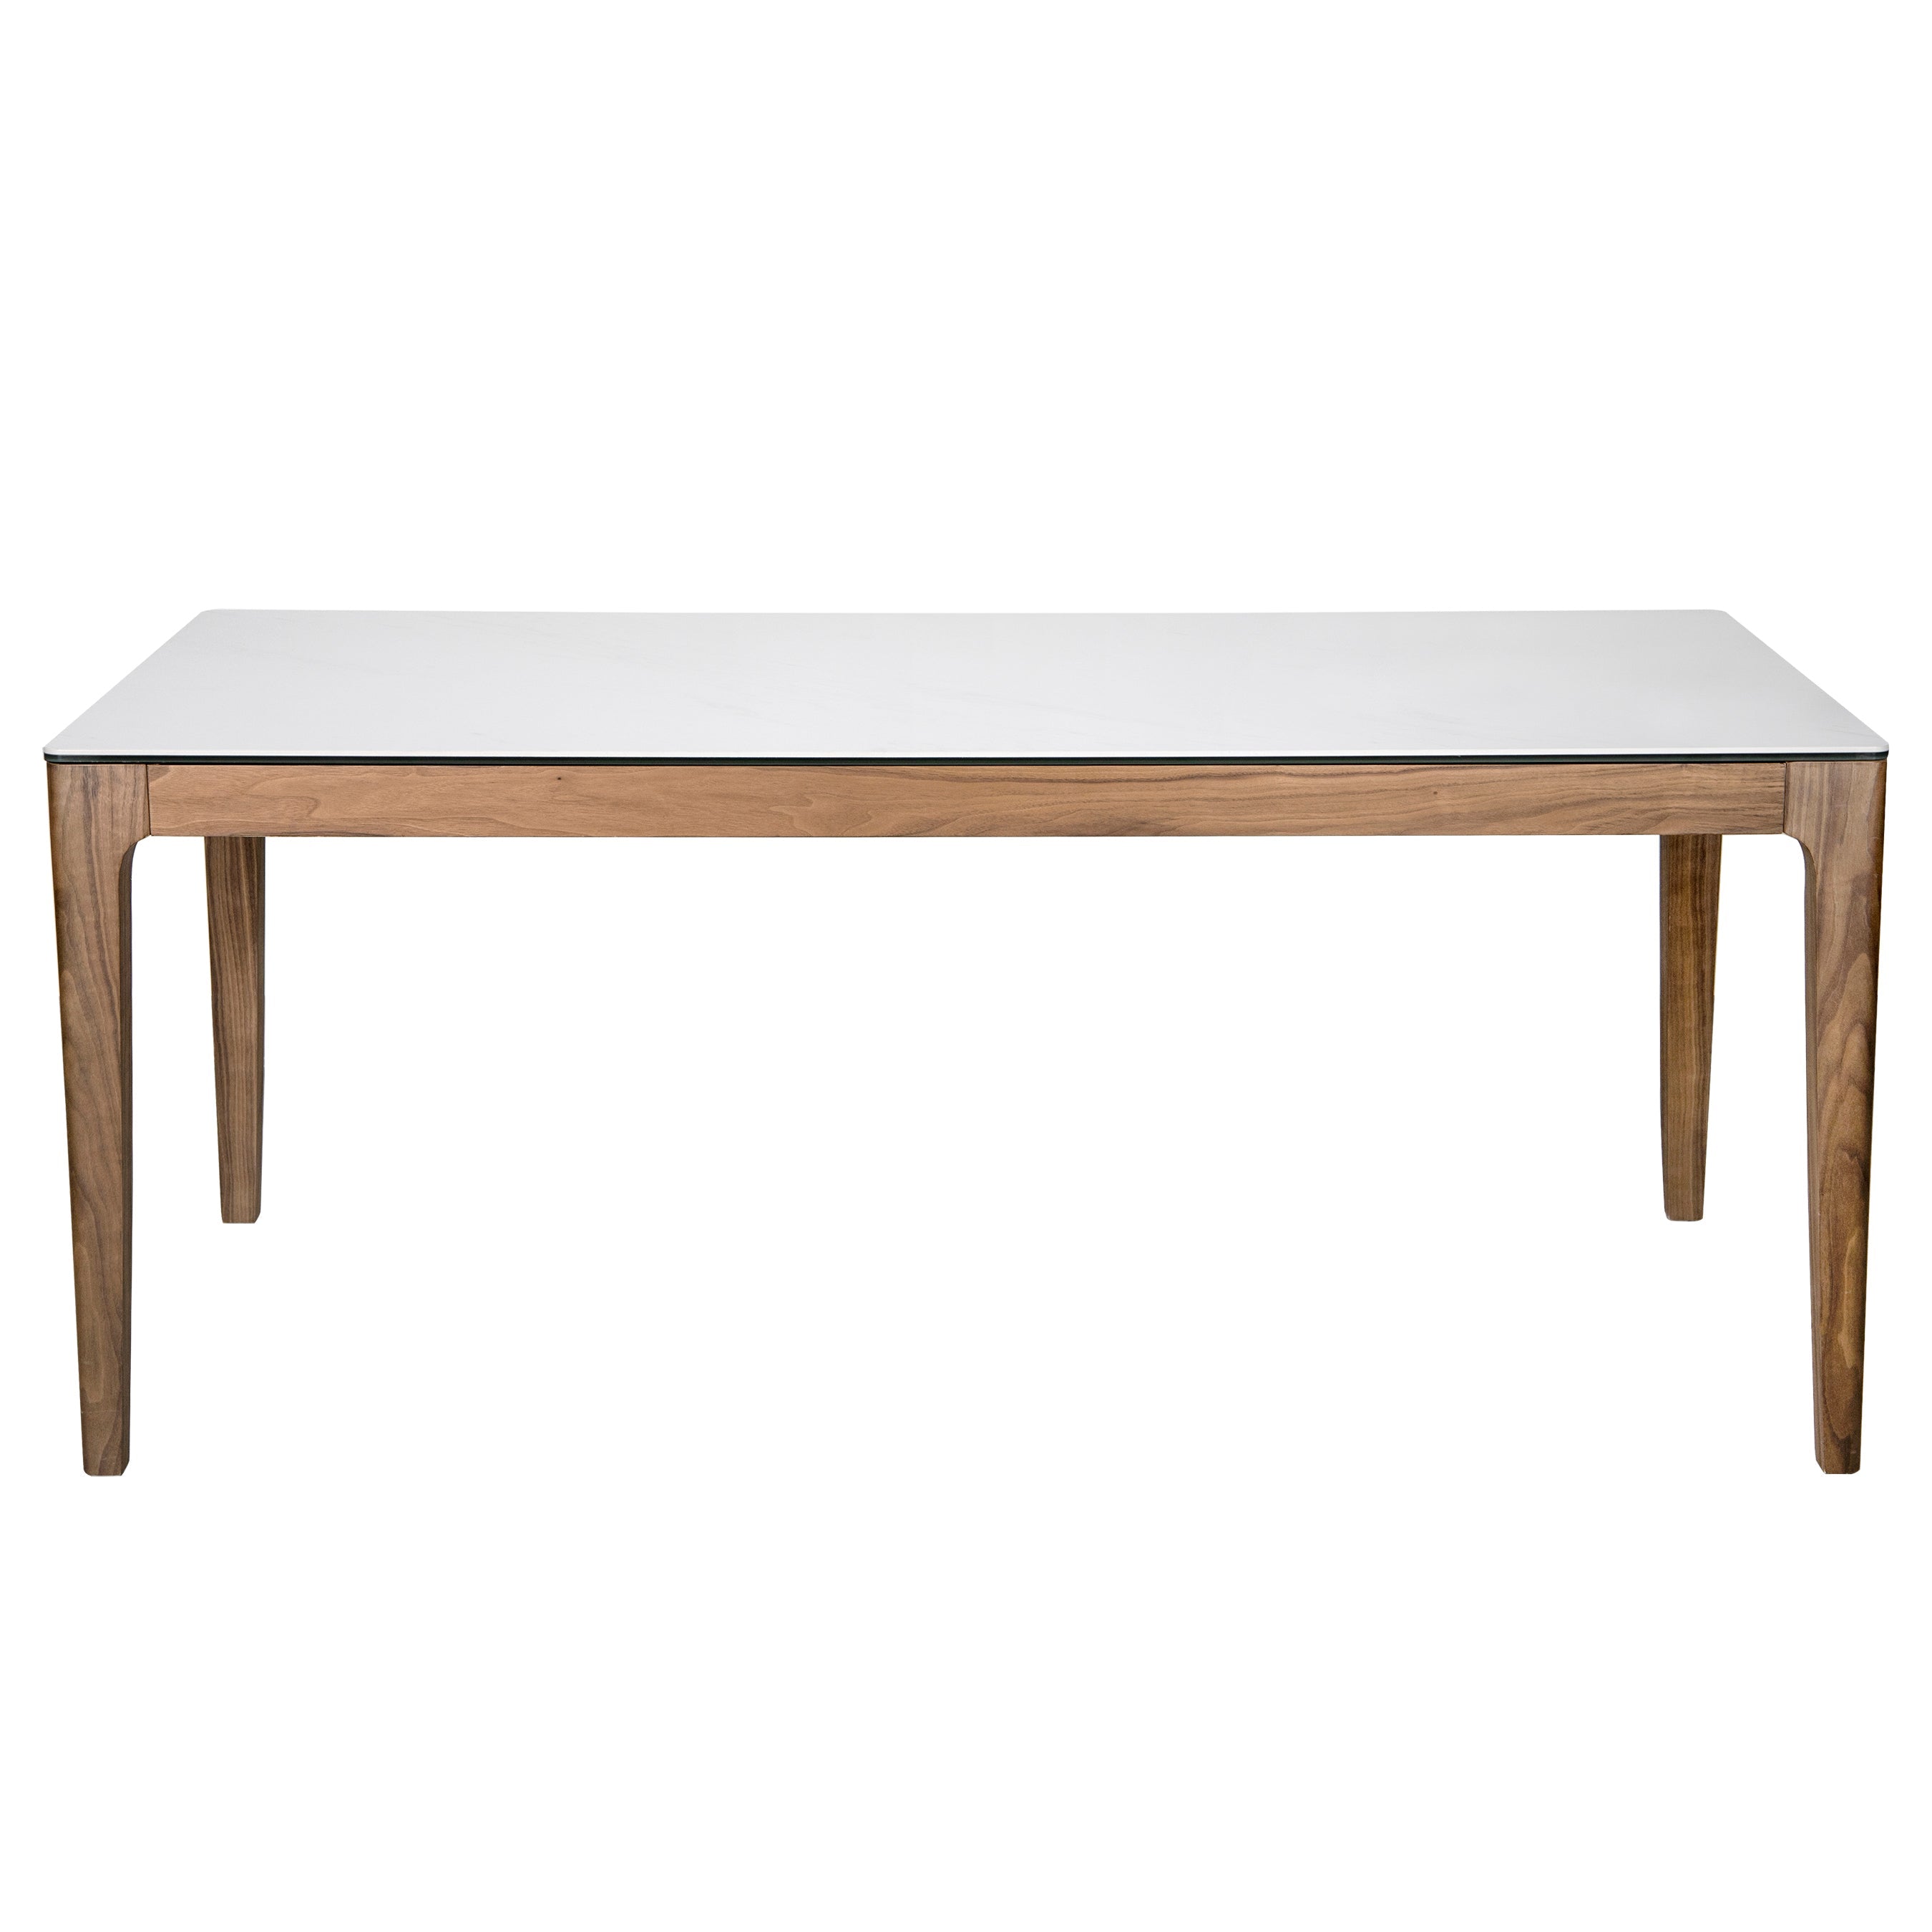 Haldis 71" Dining Table - What A Room